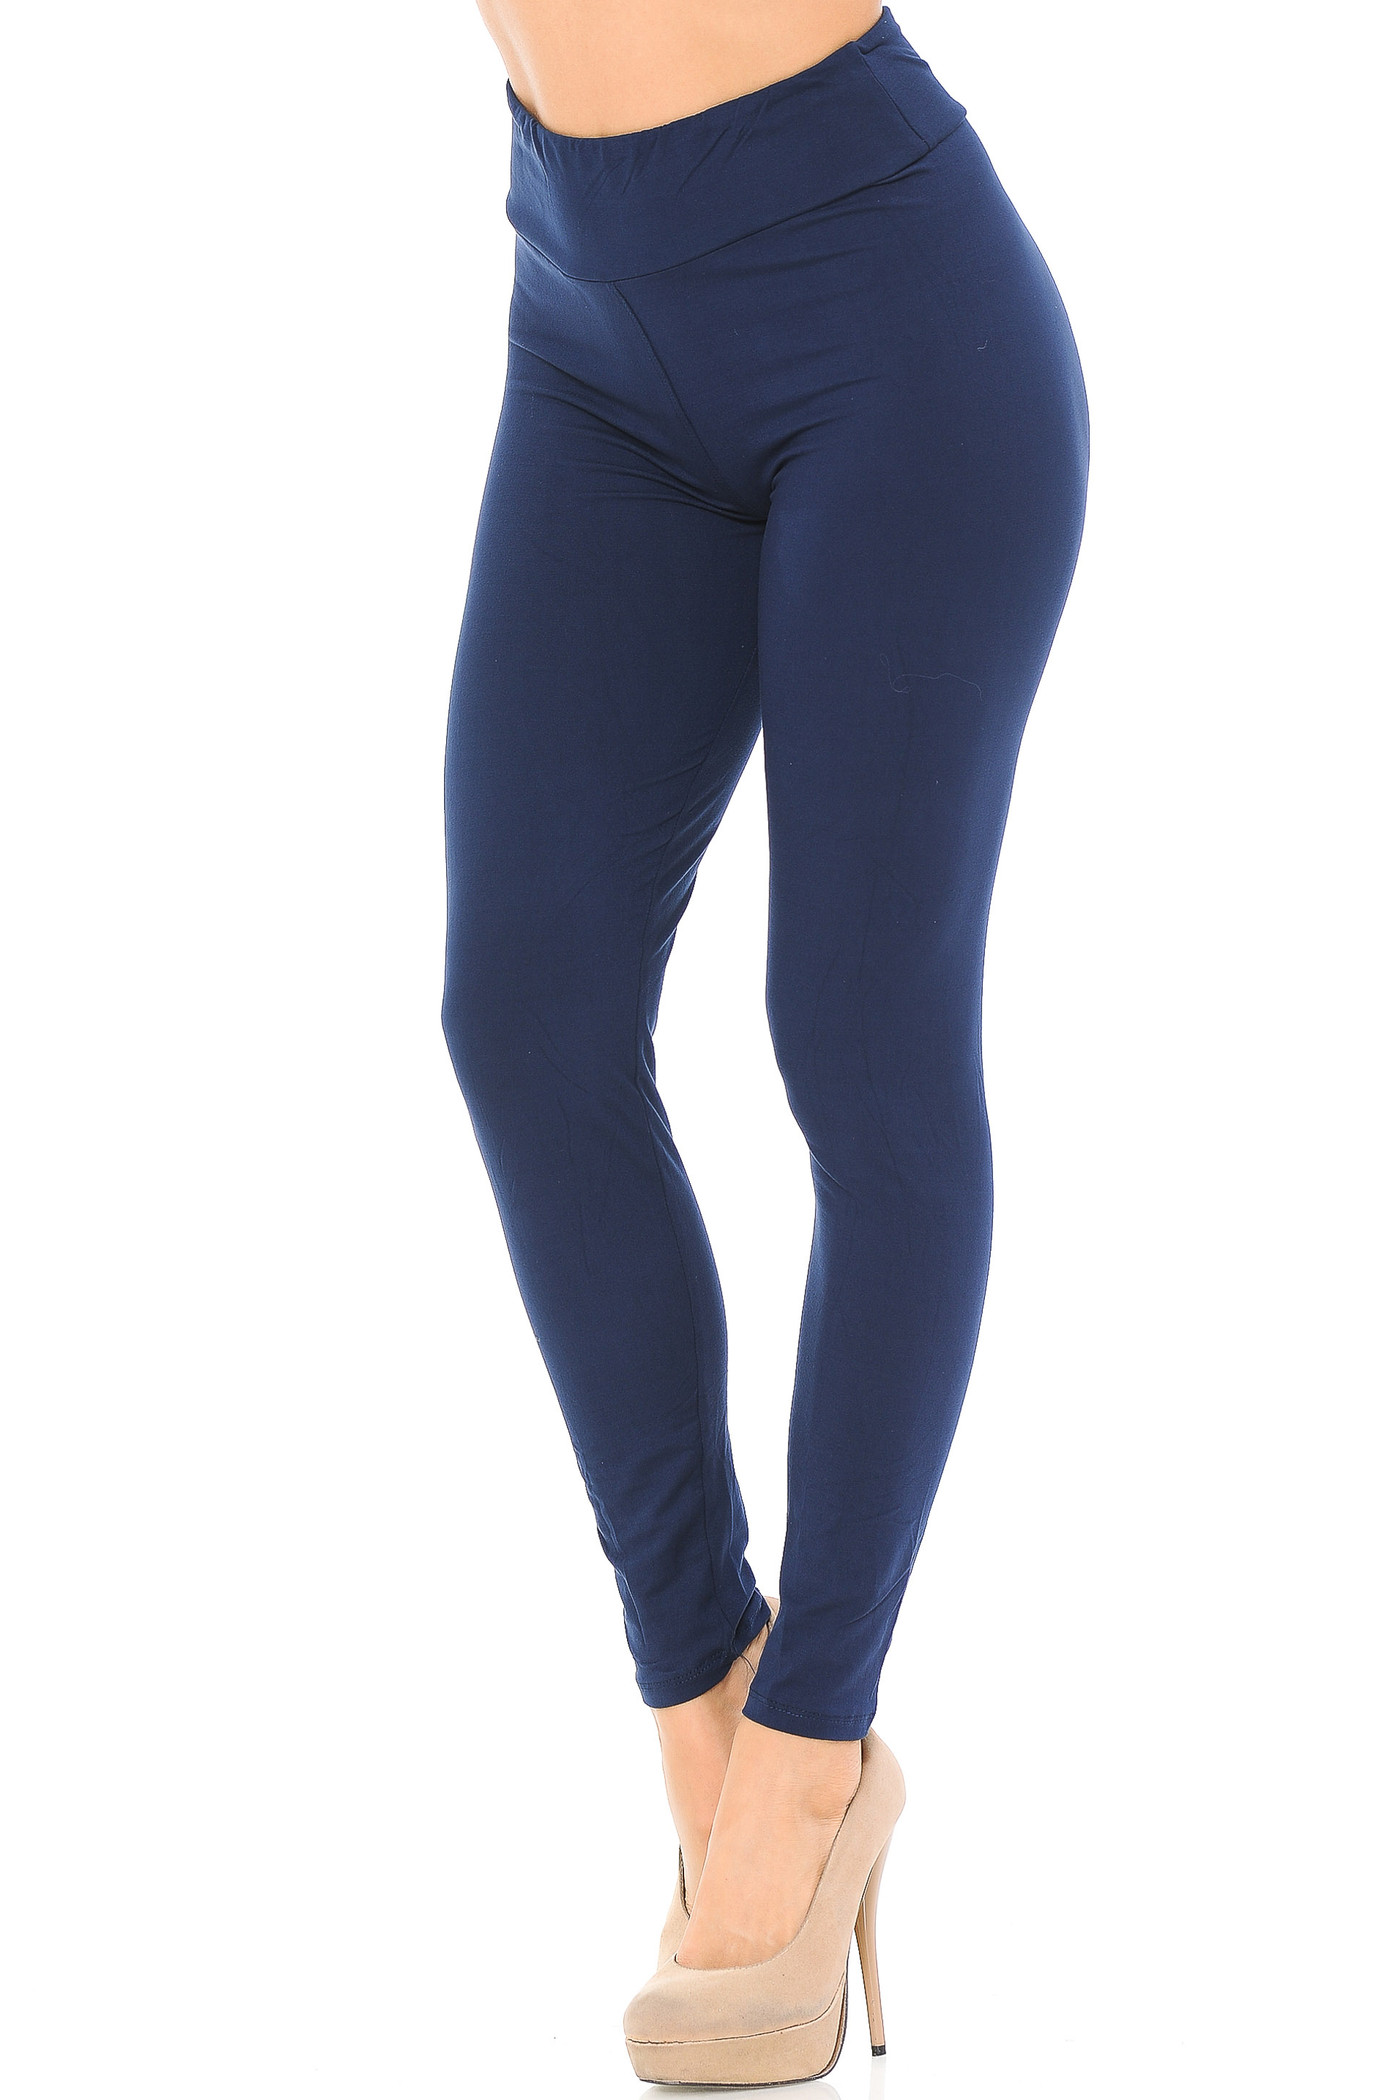 Buttery Smooth Basic Solid High Waisted Leggings - EEVEE - 3 Inch